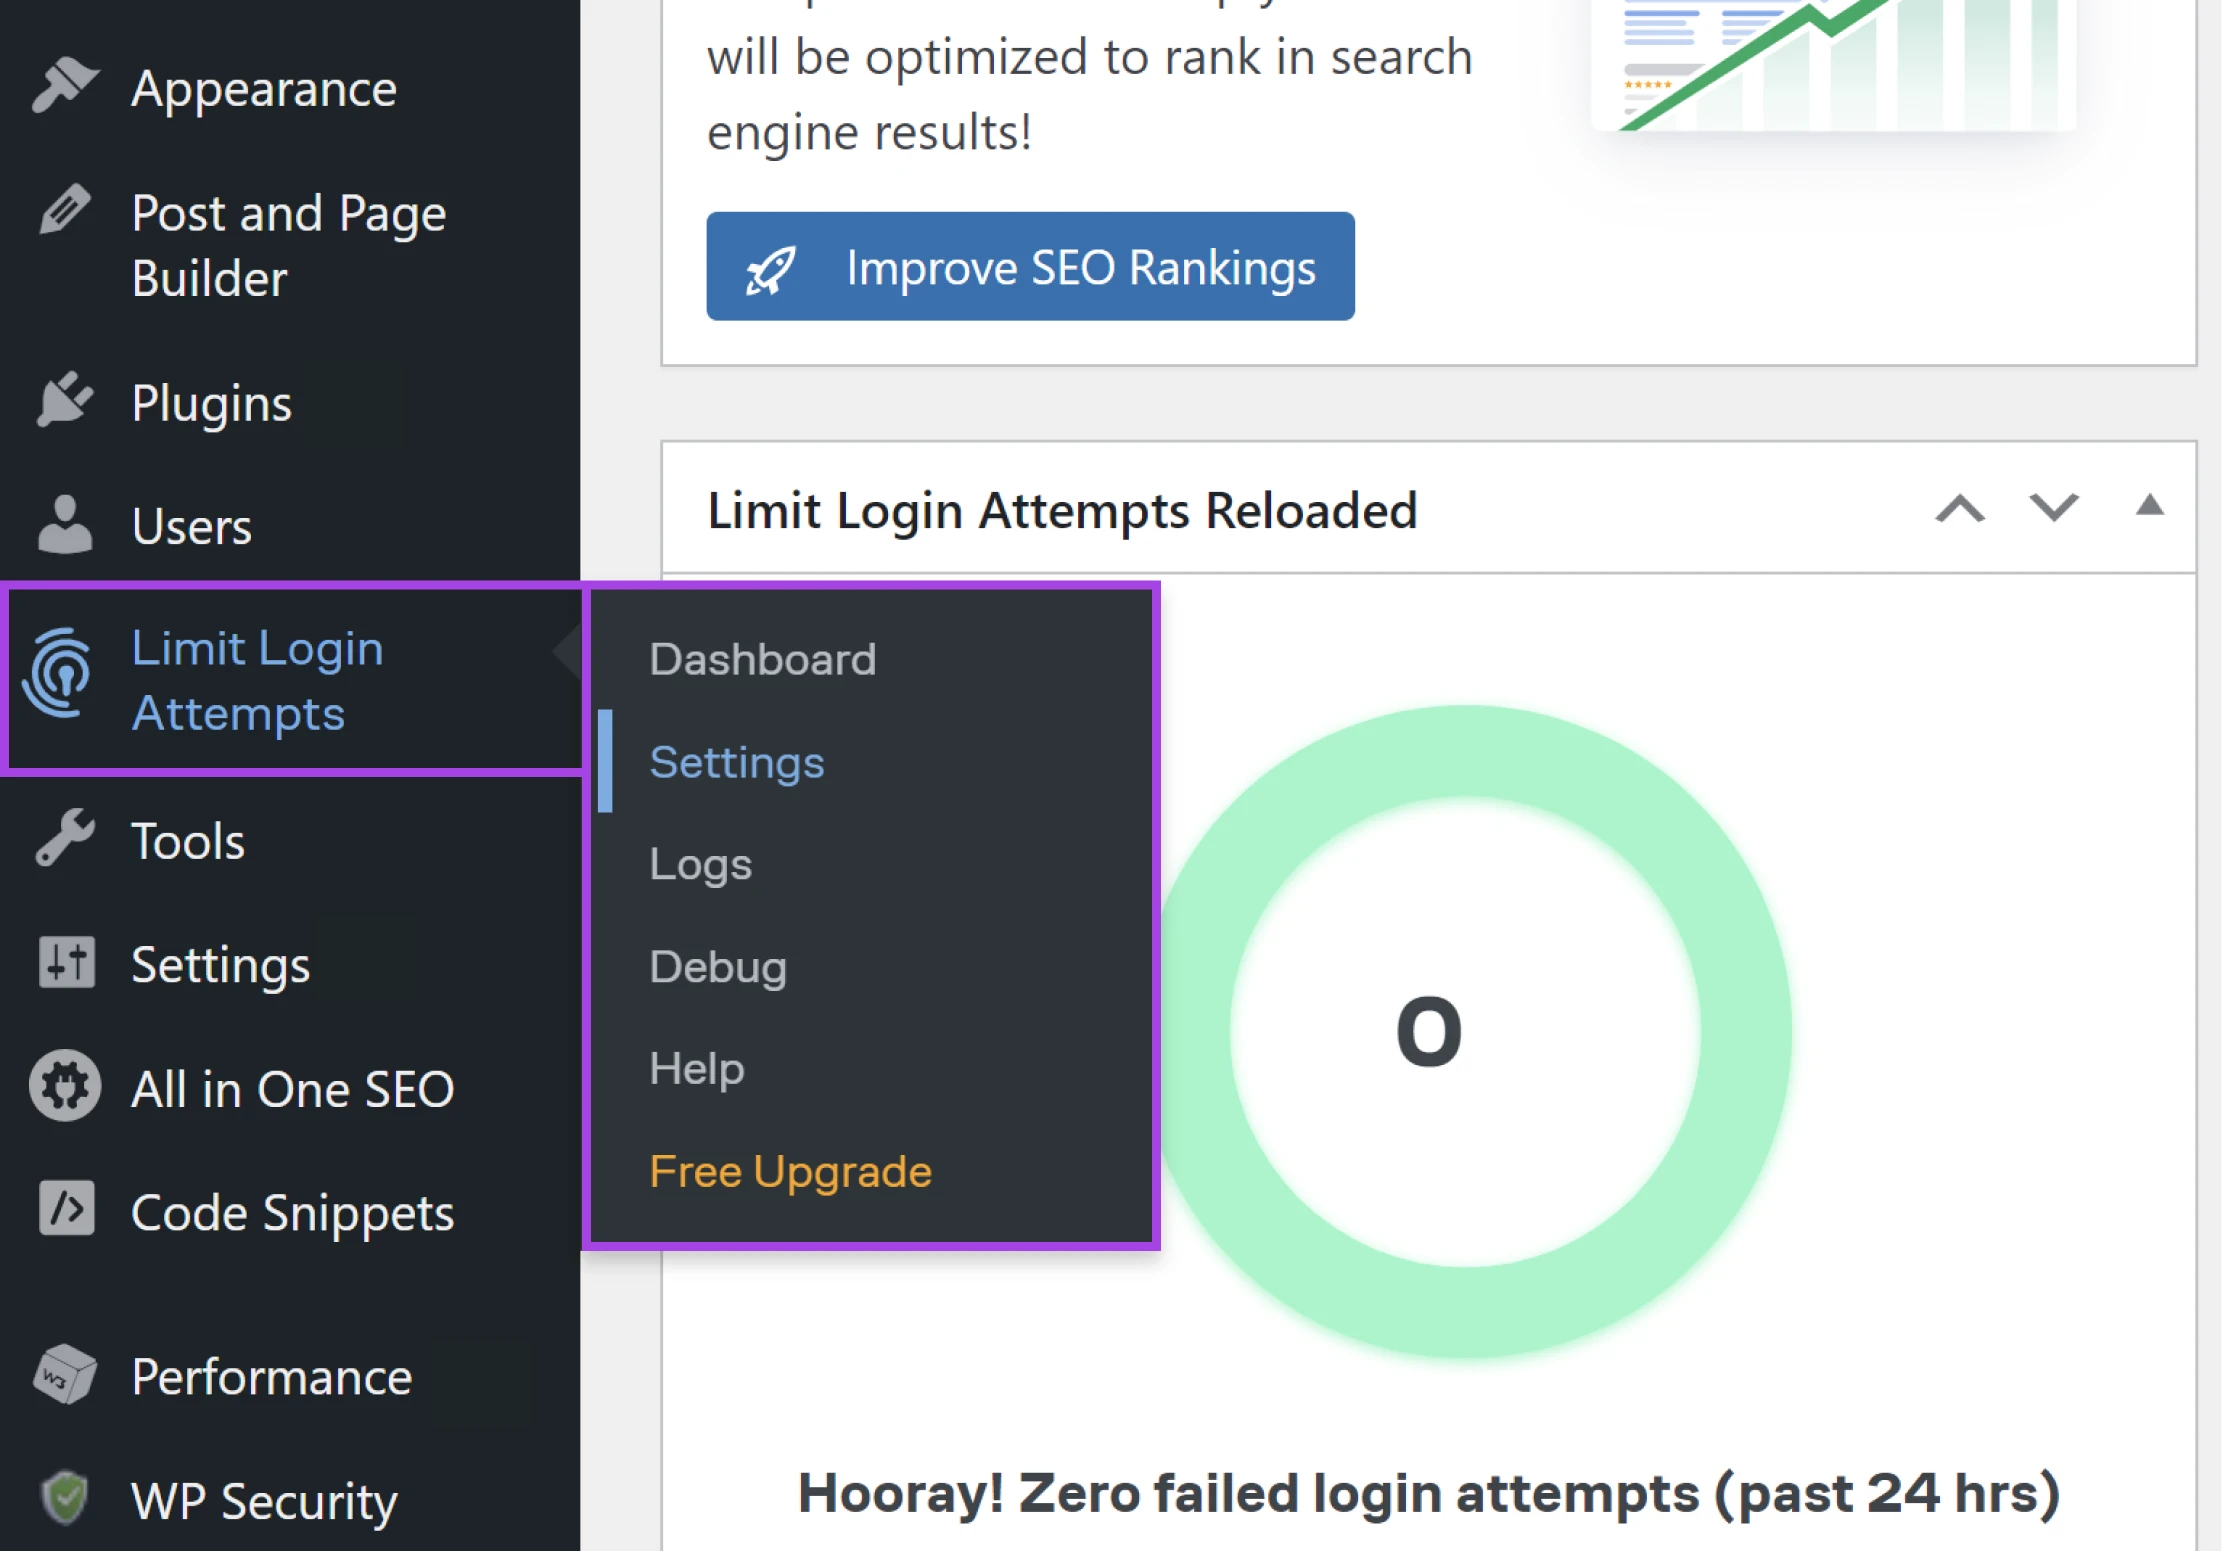 "Limit Login Attempts" highlighted on the WP Admin dashboard with "Settings" selected from the drop-down menu.